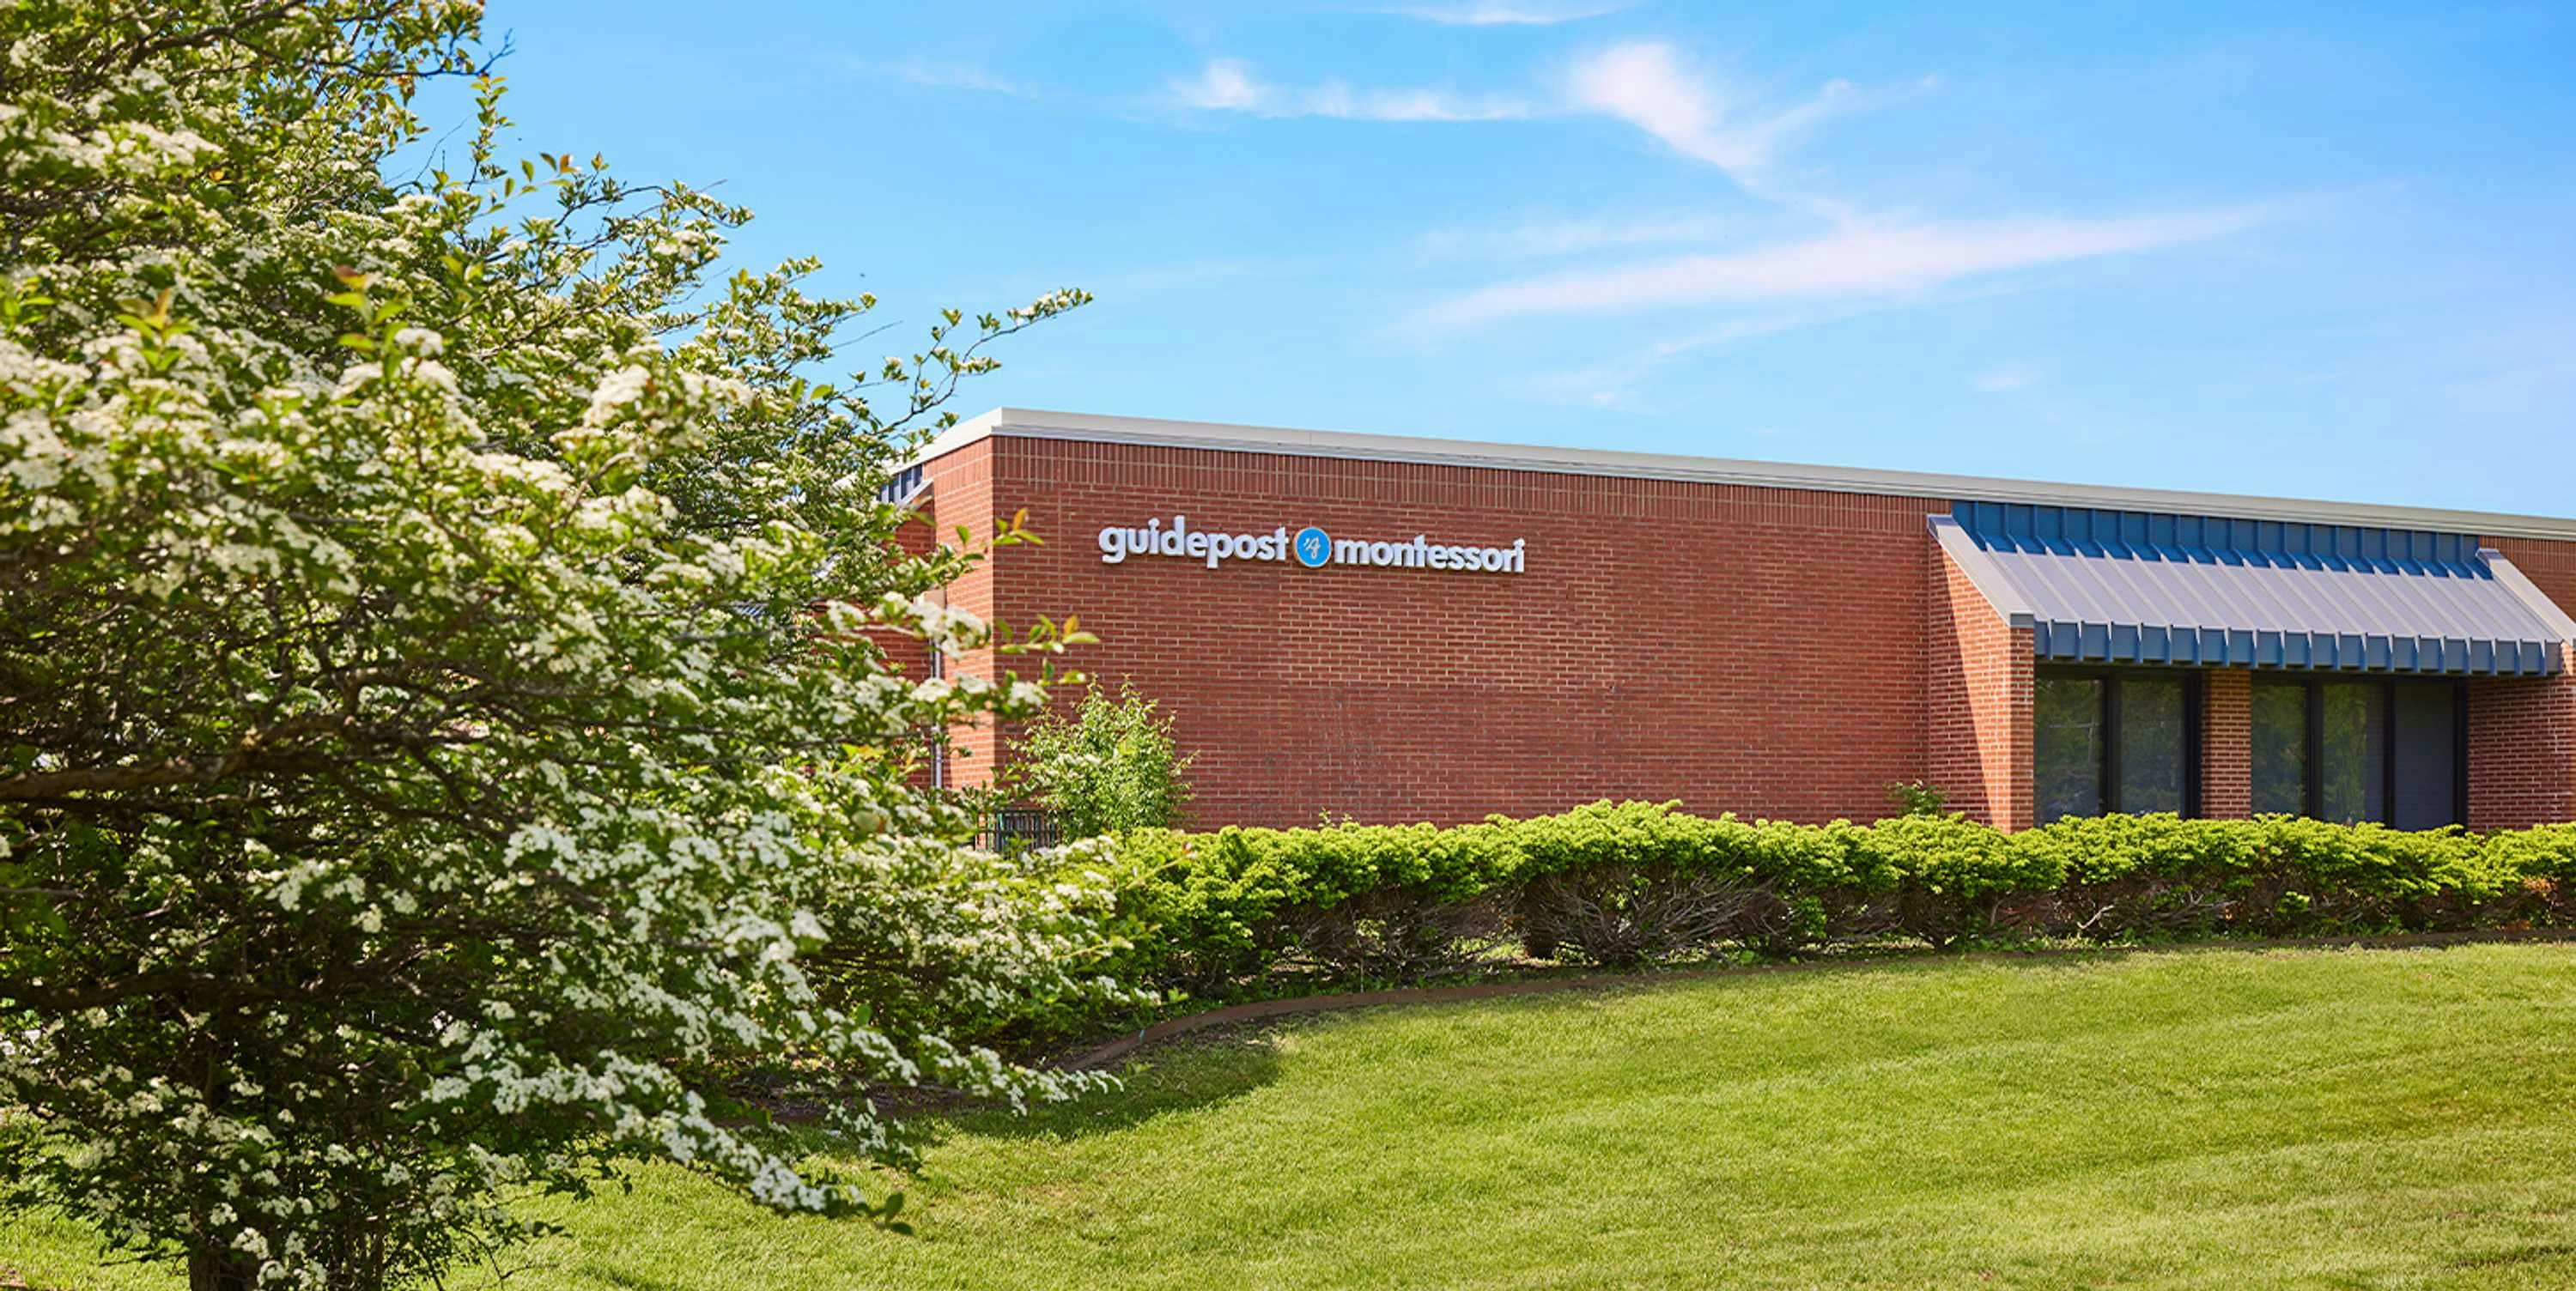 View of Guidepost Montessori at Deerbrook from a sprawling green lawn, showing the square, brick building with a branded Guidepost Montessori sign as well as a connected structural awning over some windows.